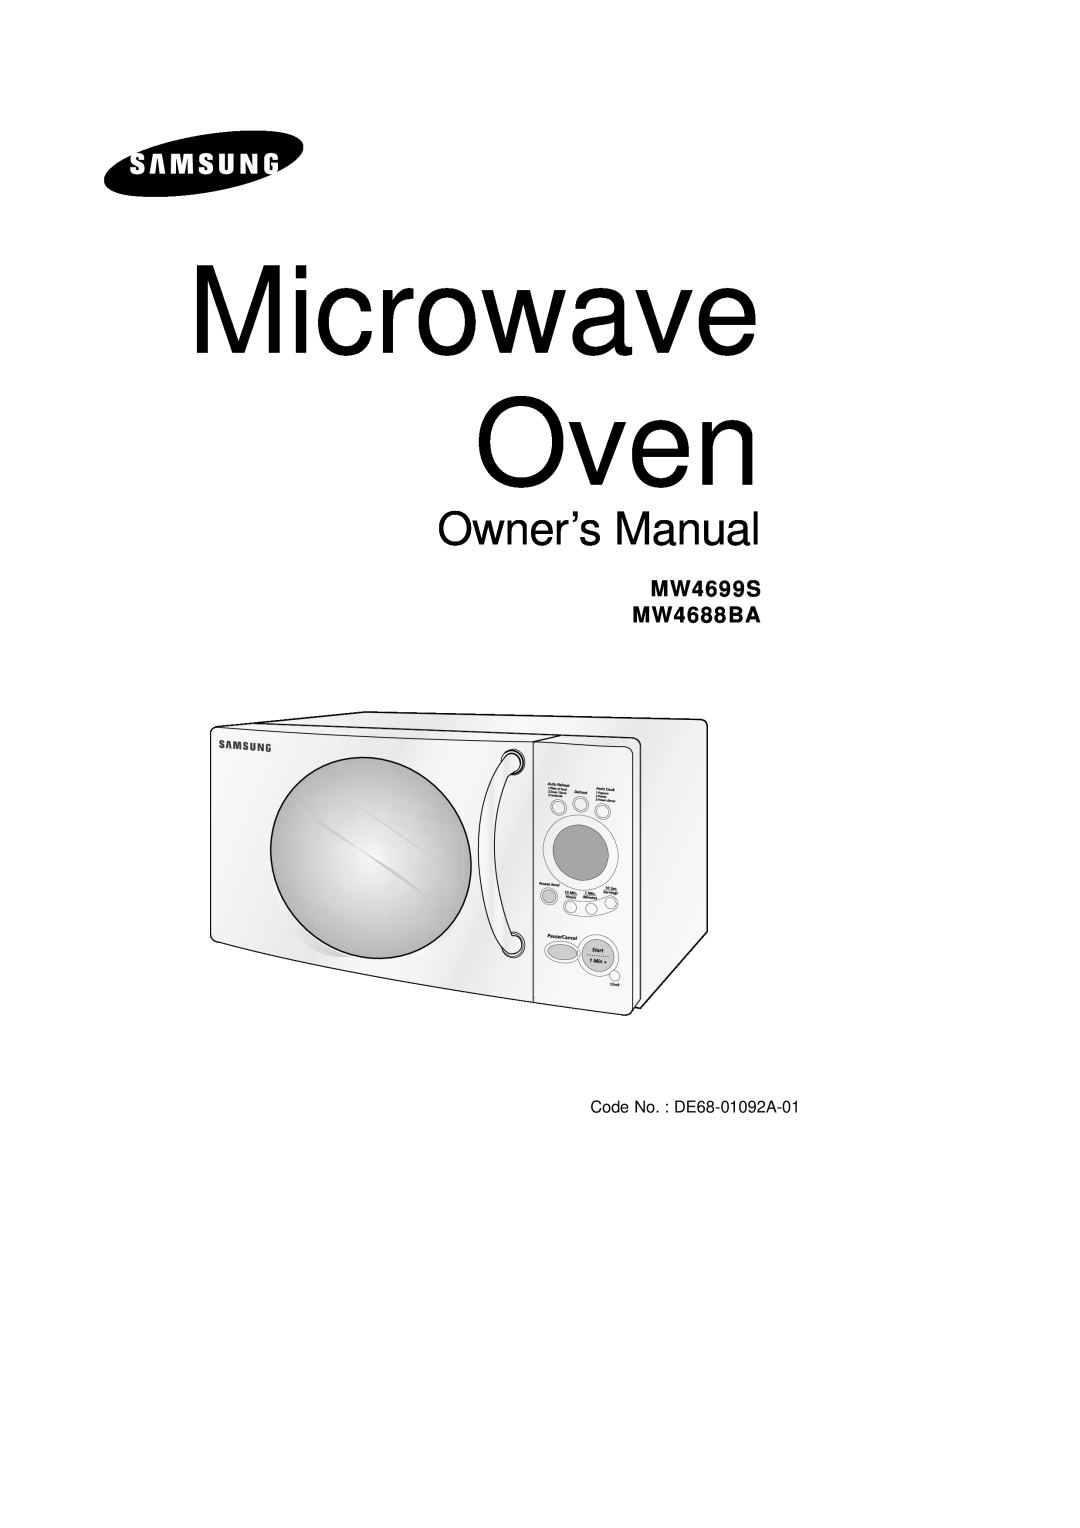 Samsung owner manual Microwave Oven, Owner’s Manual, MW4699S MW4688BA, Code No. : DE68-01092A-01 